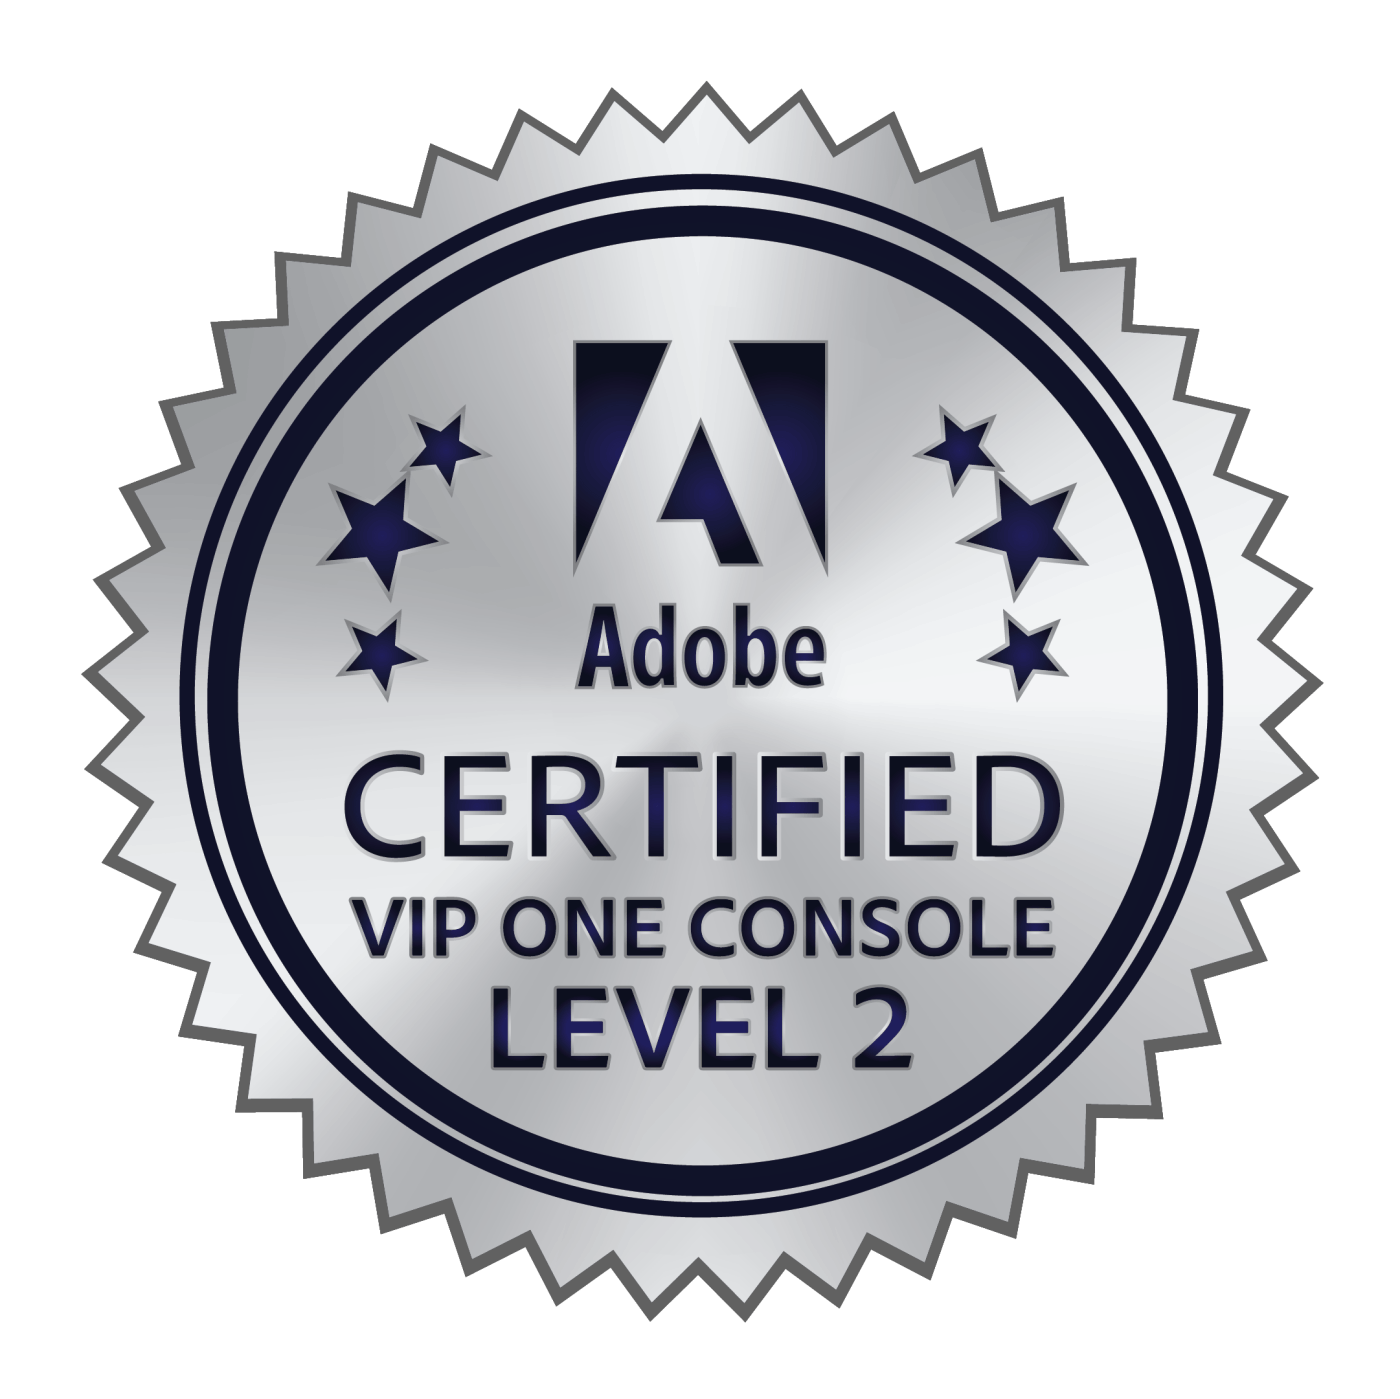 Adobe Certified VIP One Console - Level 2